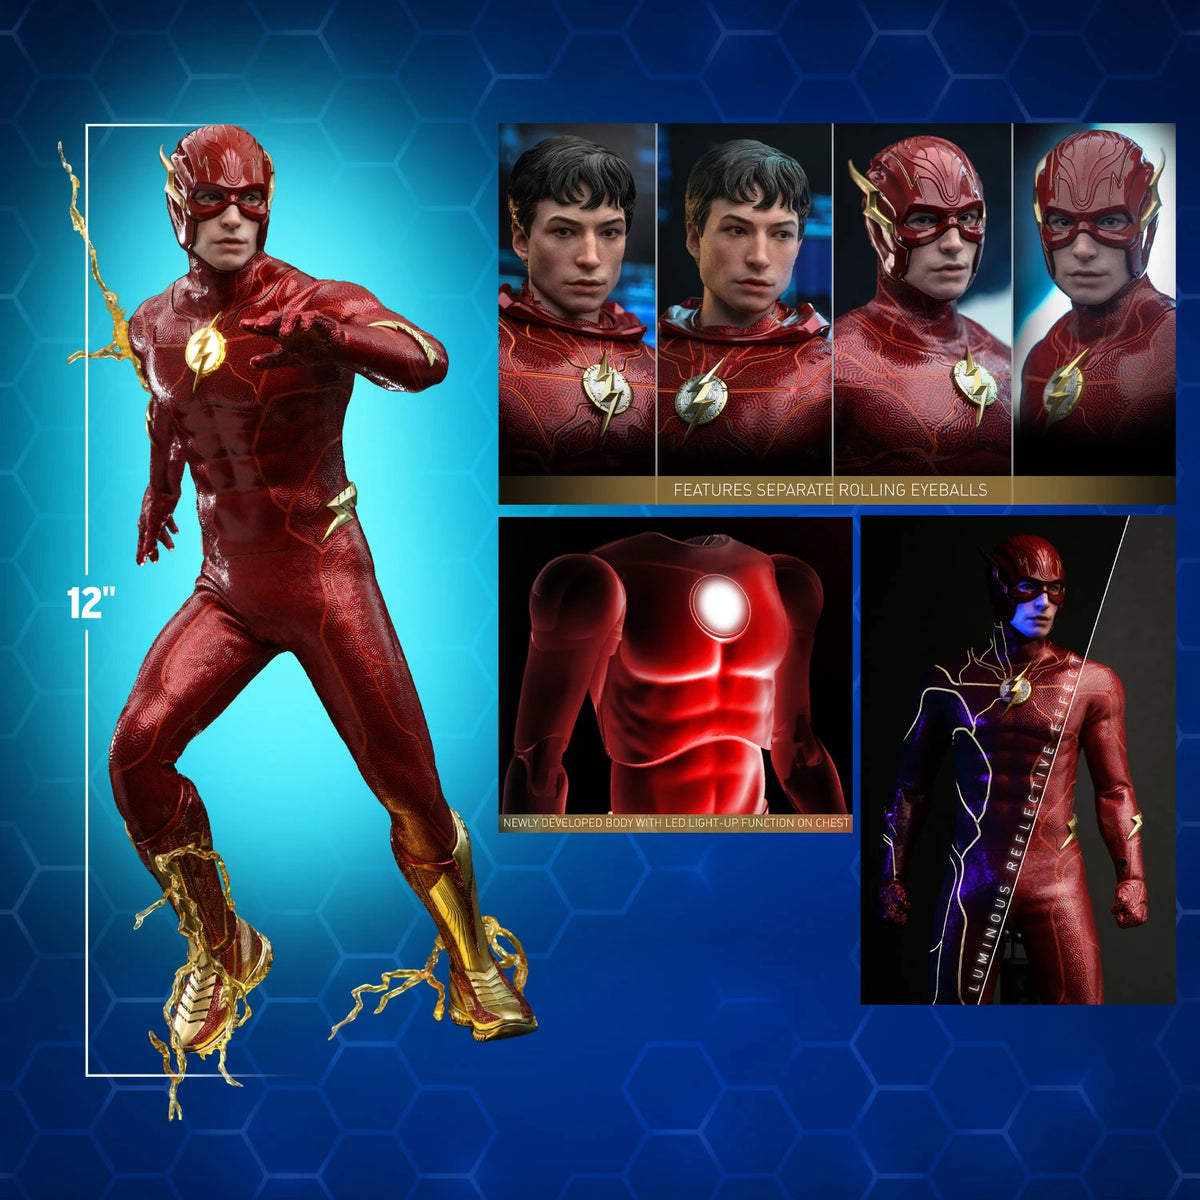 The Flash' (2023) 1/6th scale Collectible Figure 📸 via